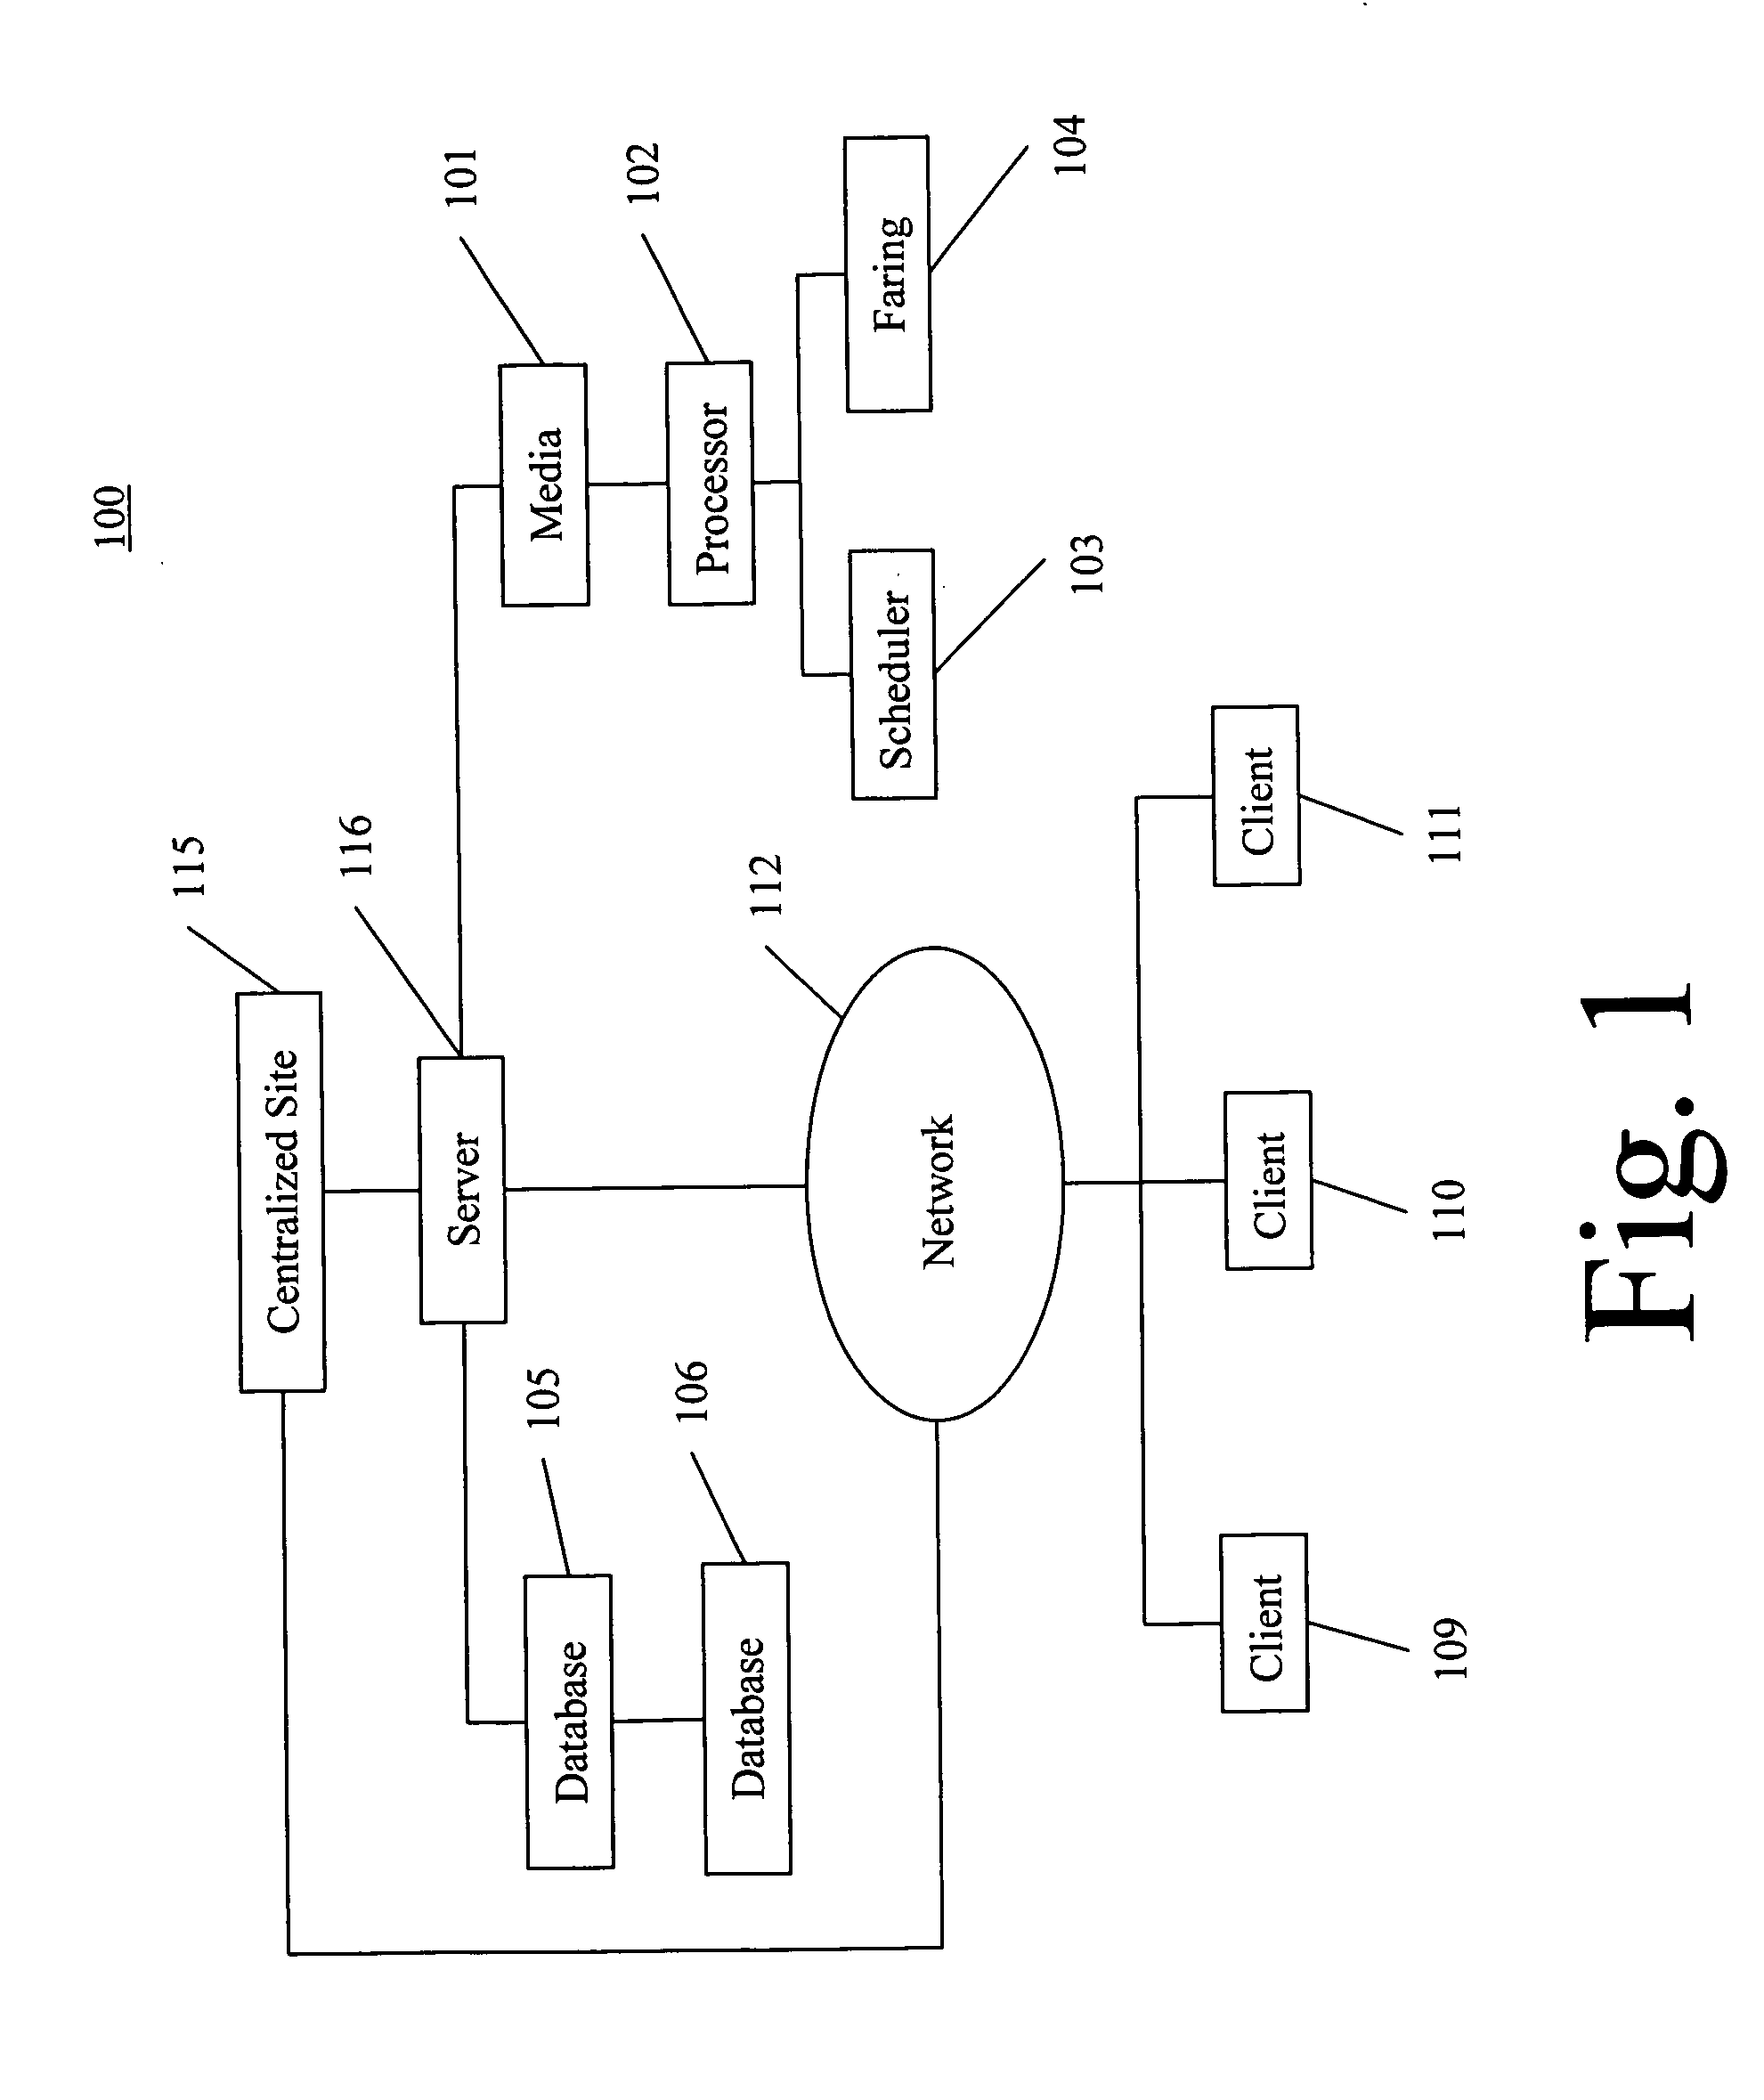 Graphical user interface for and method of use for a computer-implemented system and method for booking travel itineraries